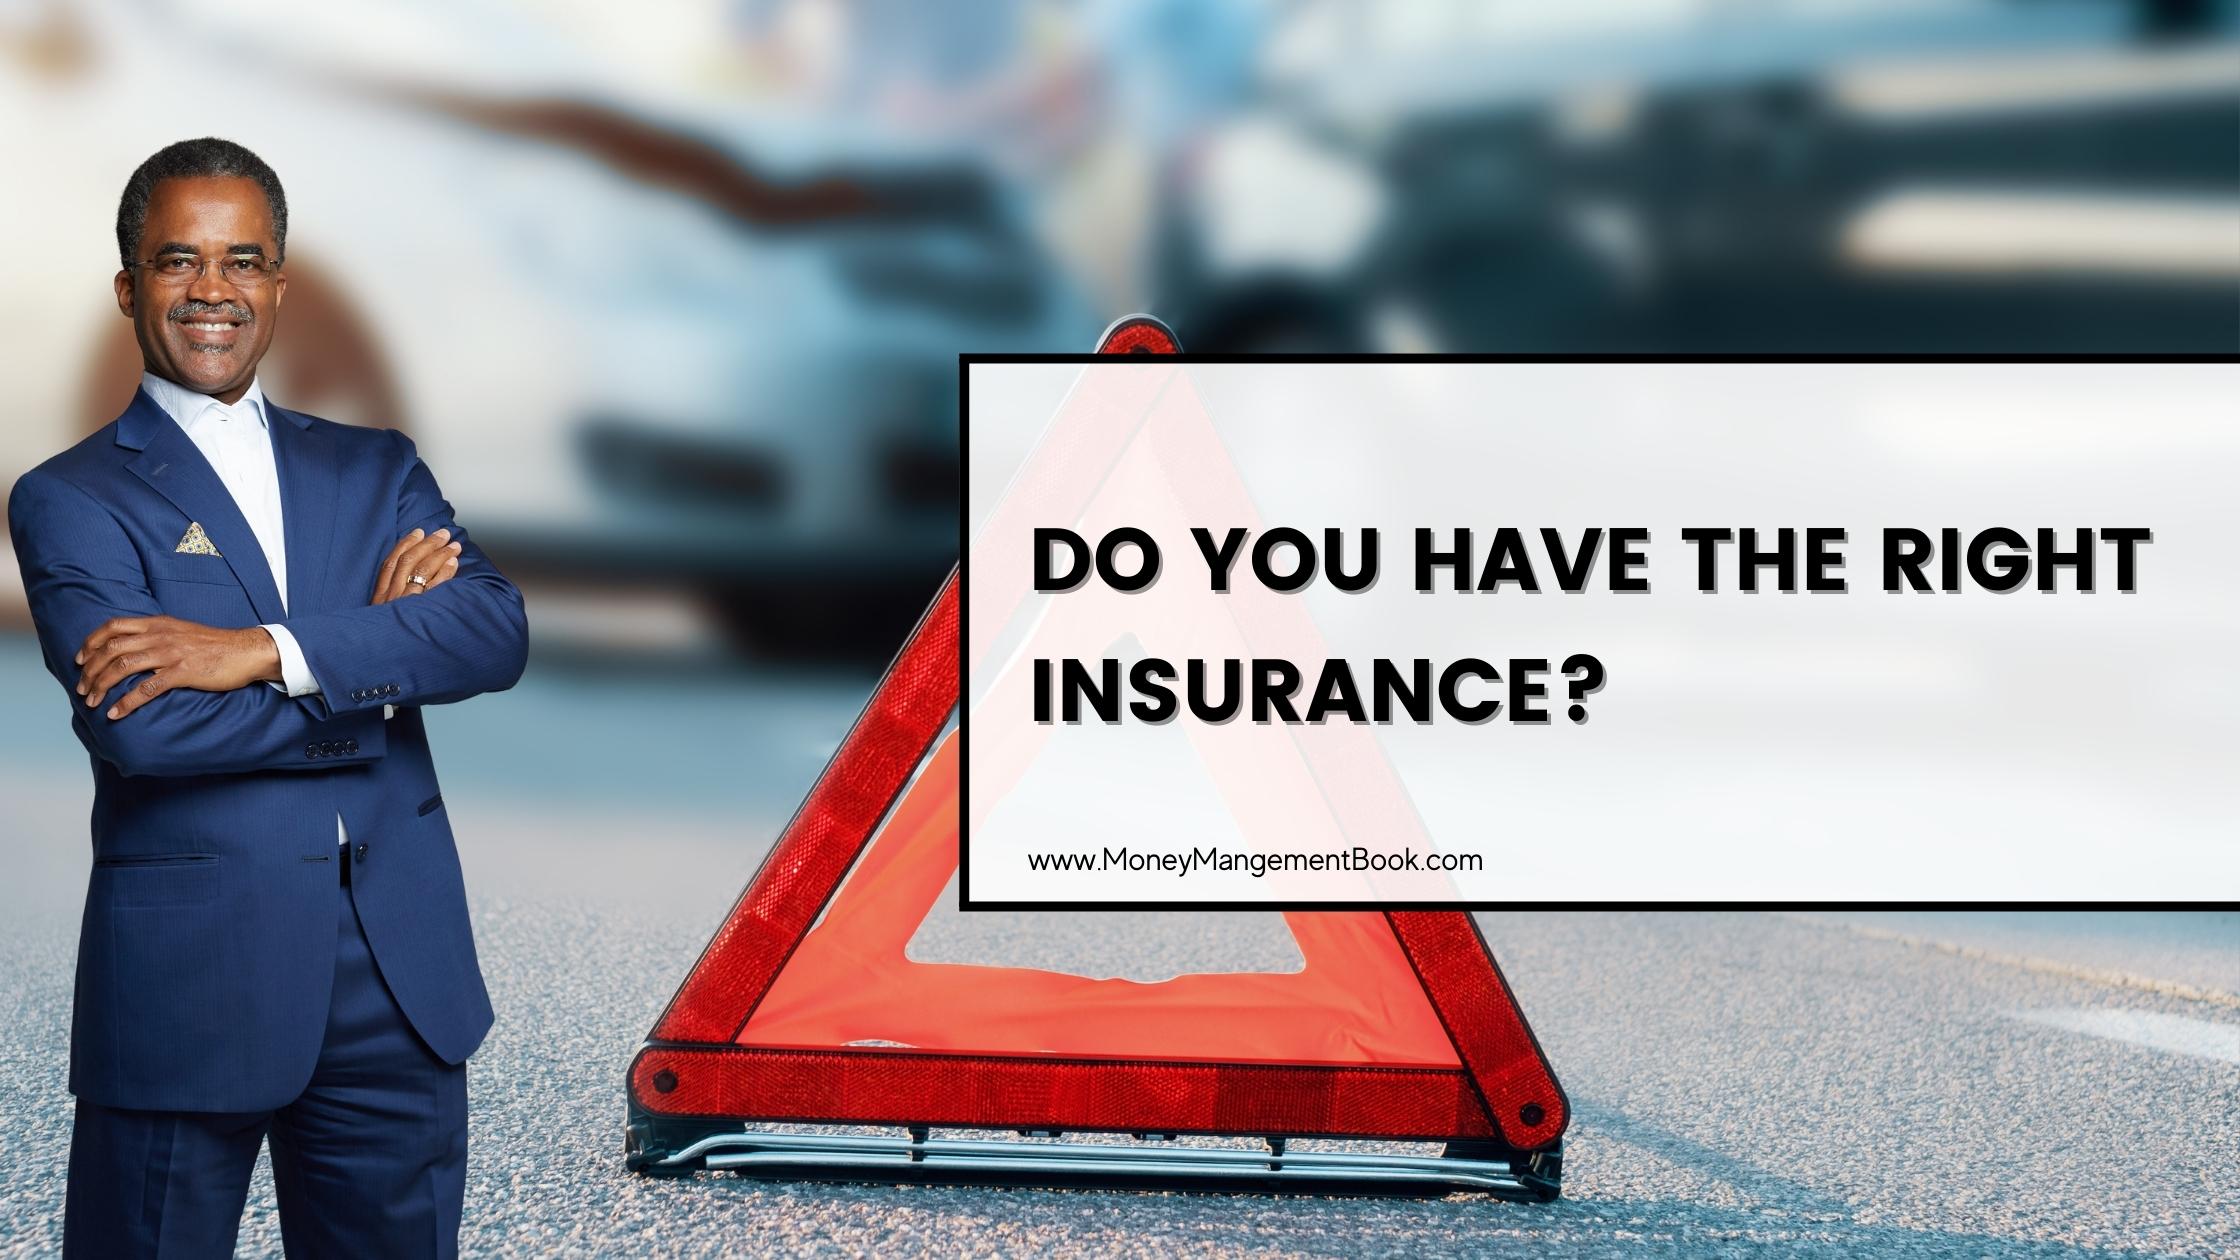 Do You Have the Right Insurance blog post